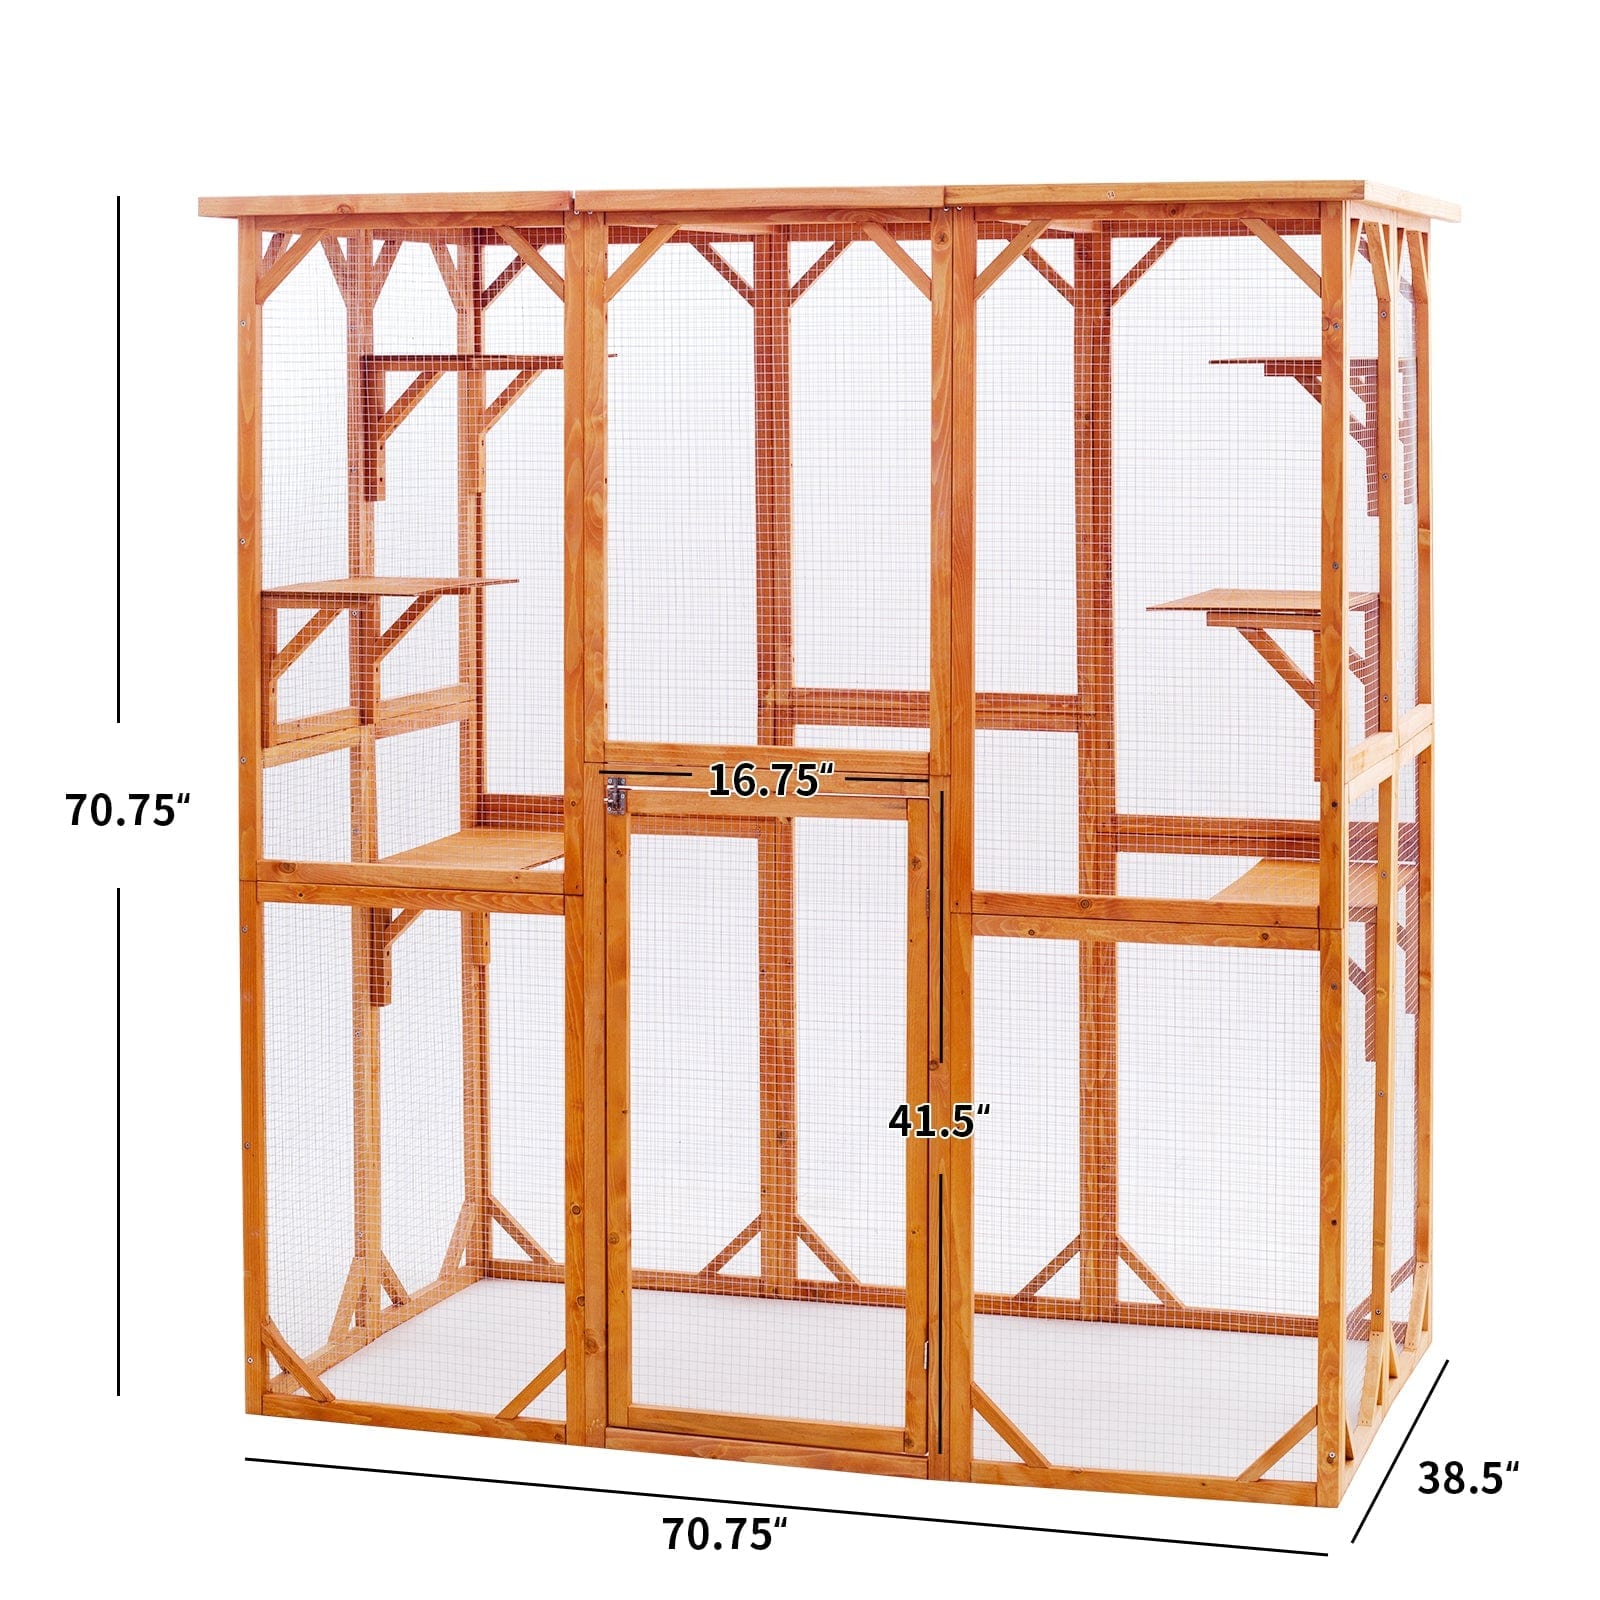 Elecwish Large Cat House Catio Outdoor Cat Enclosure size is 71" x 38.5" x 71"